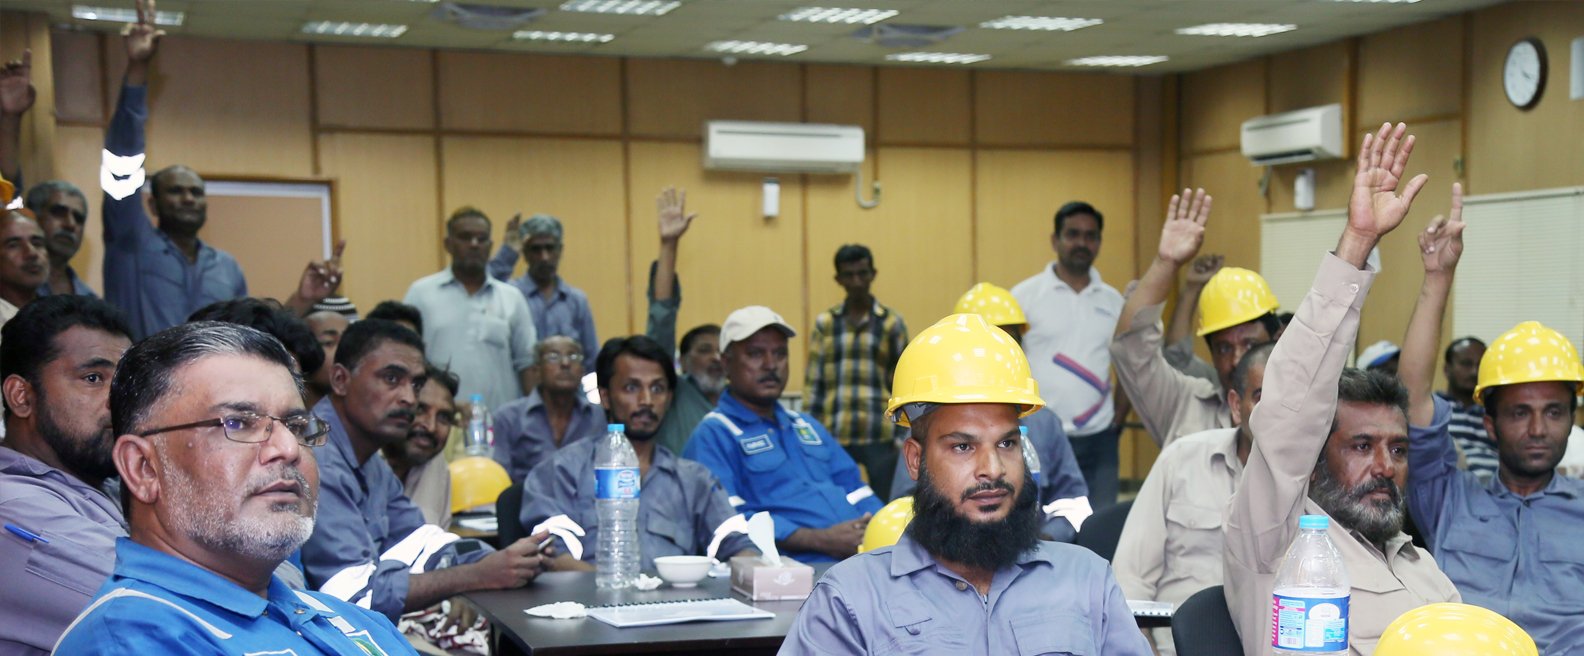 In-house training session on safe work practices for non-management staff